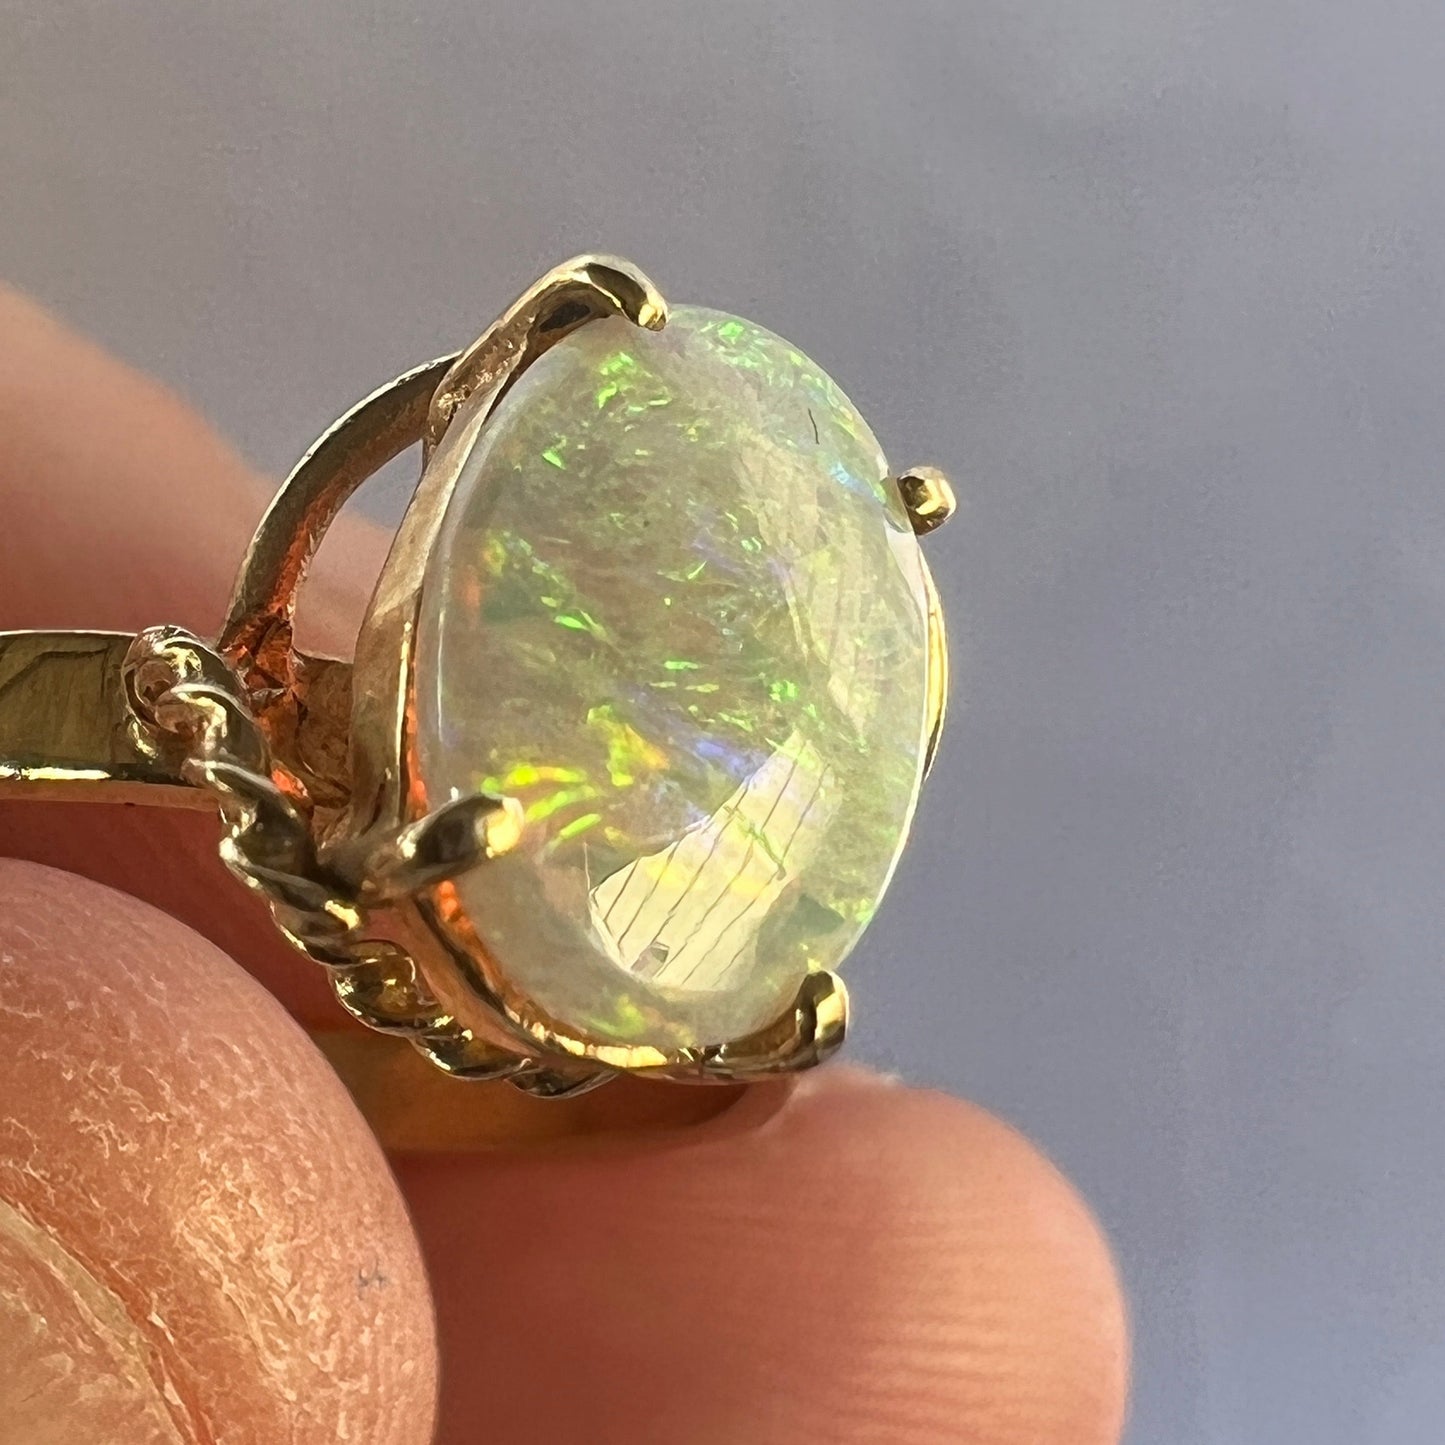 Nice bespoke Coober Pedy crystal opal set in 14ct gold with a twist! 